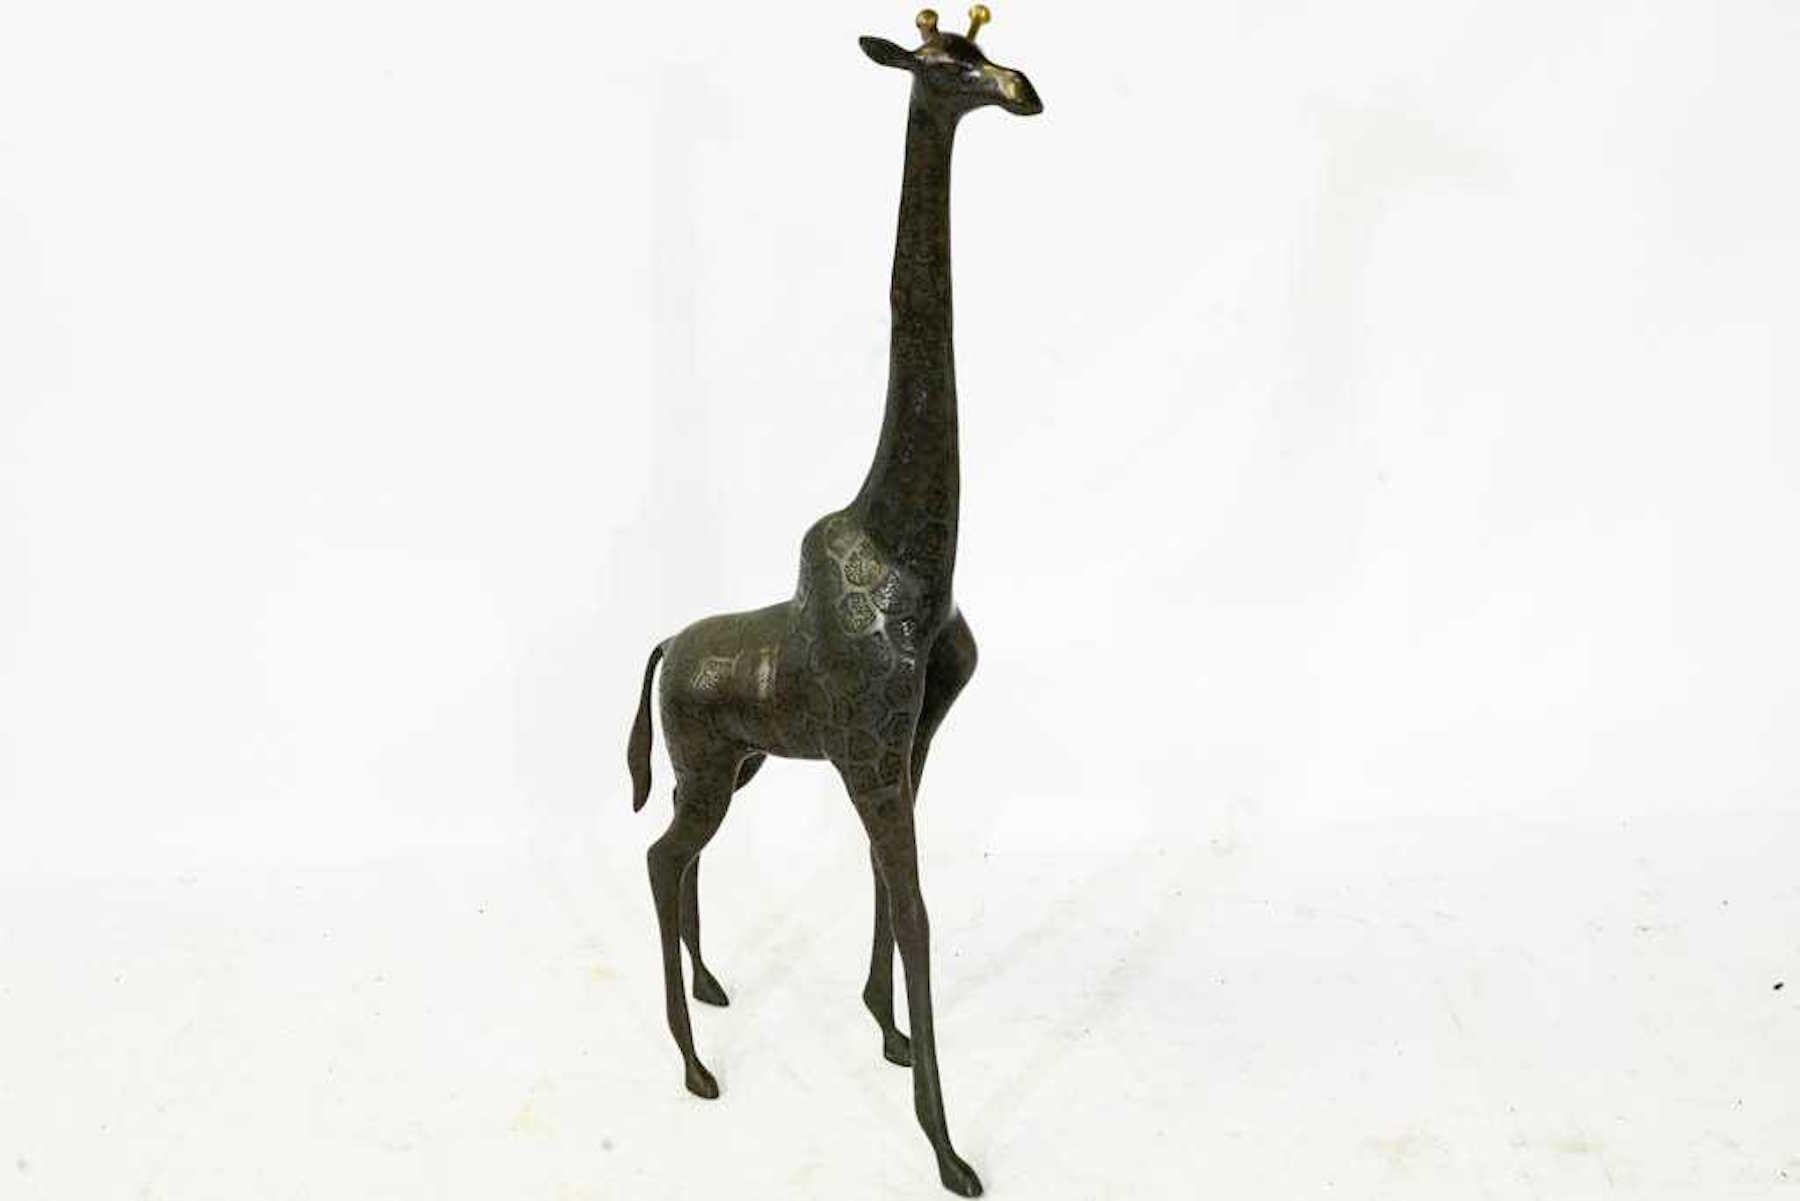 Midcentury bronze sculpture of a giraffe, well cast and modeled with an expressive face.